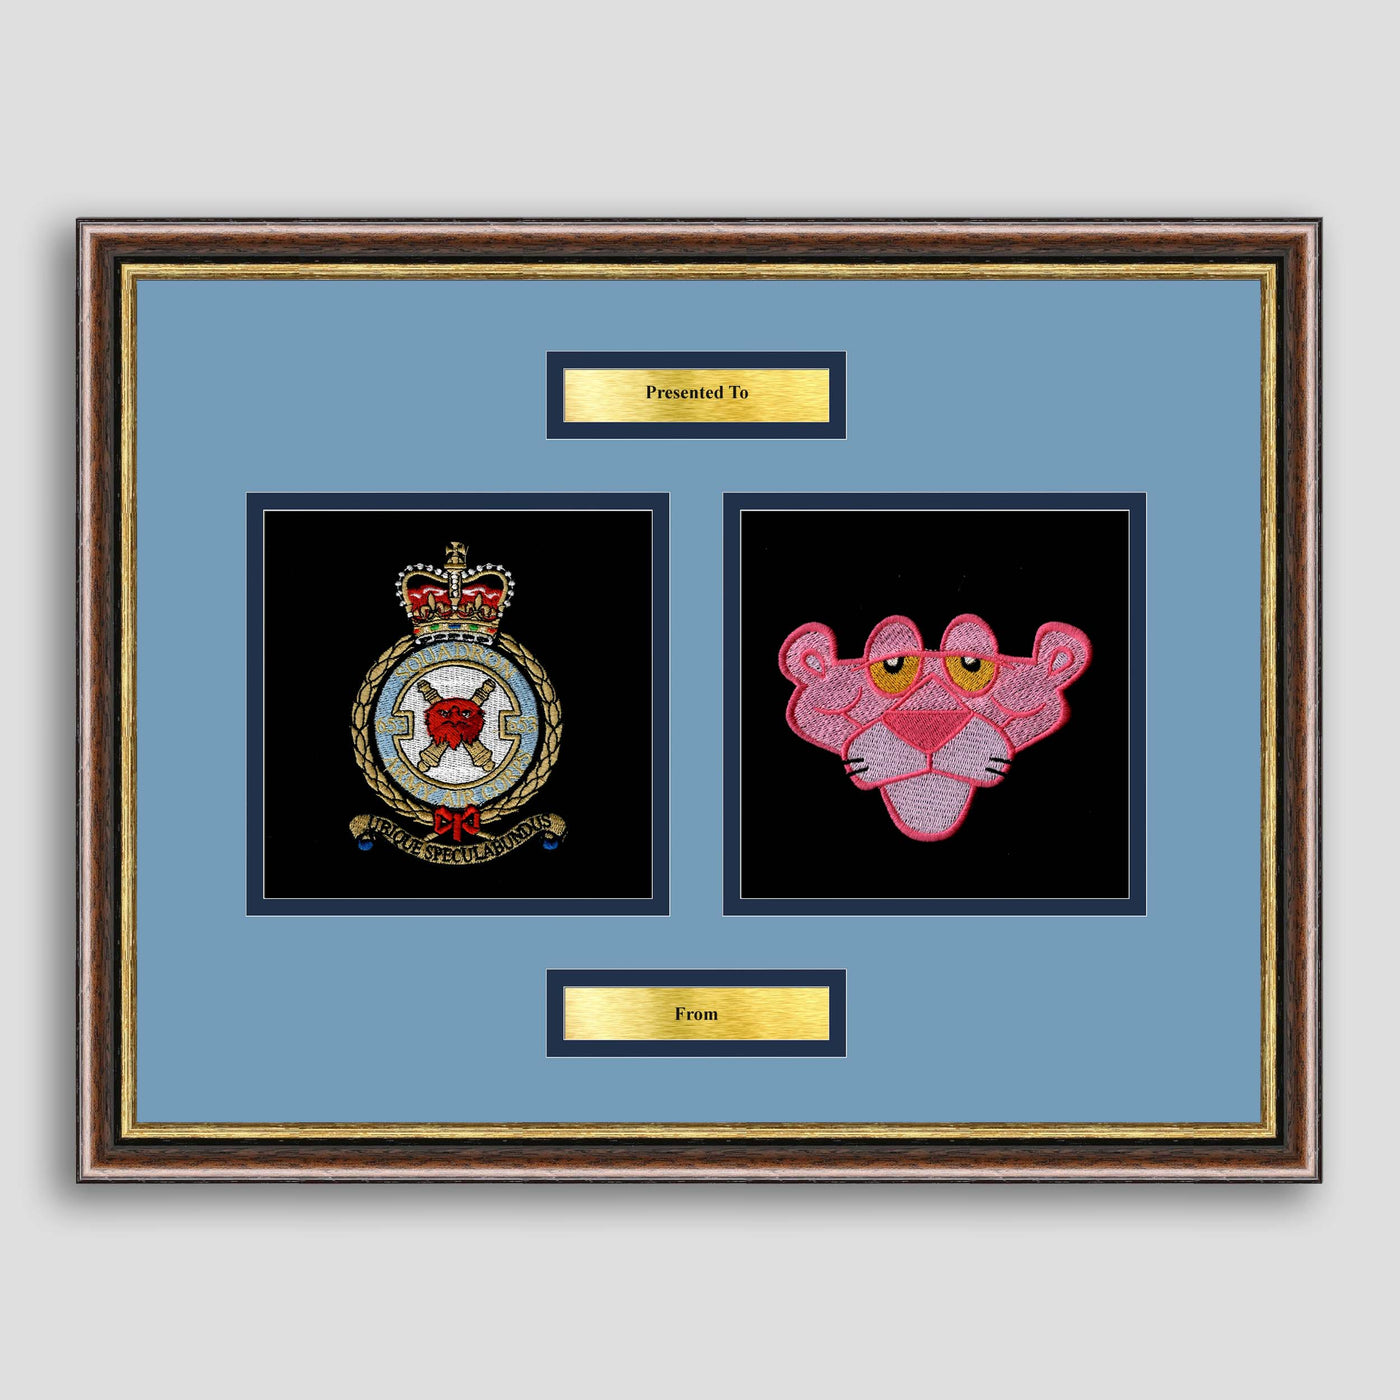 653 Sqn Army Air Corps & The Pink Panther Framed Military Embroidery Presentation